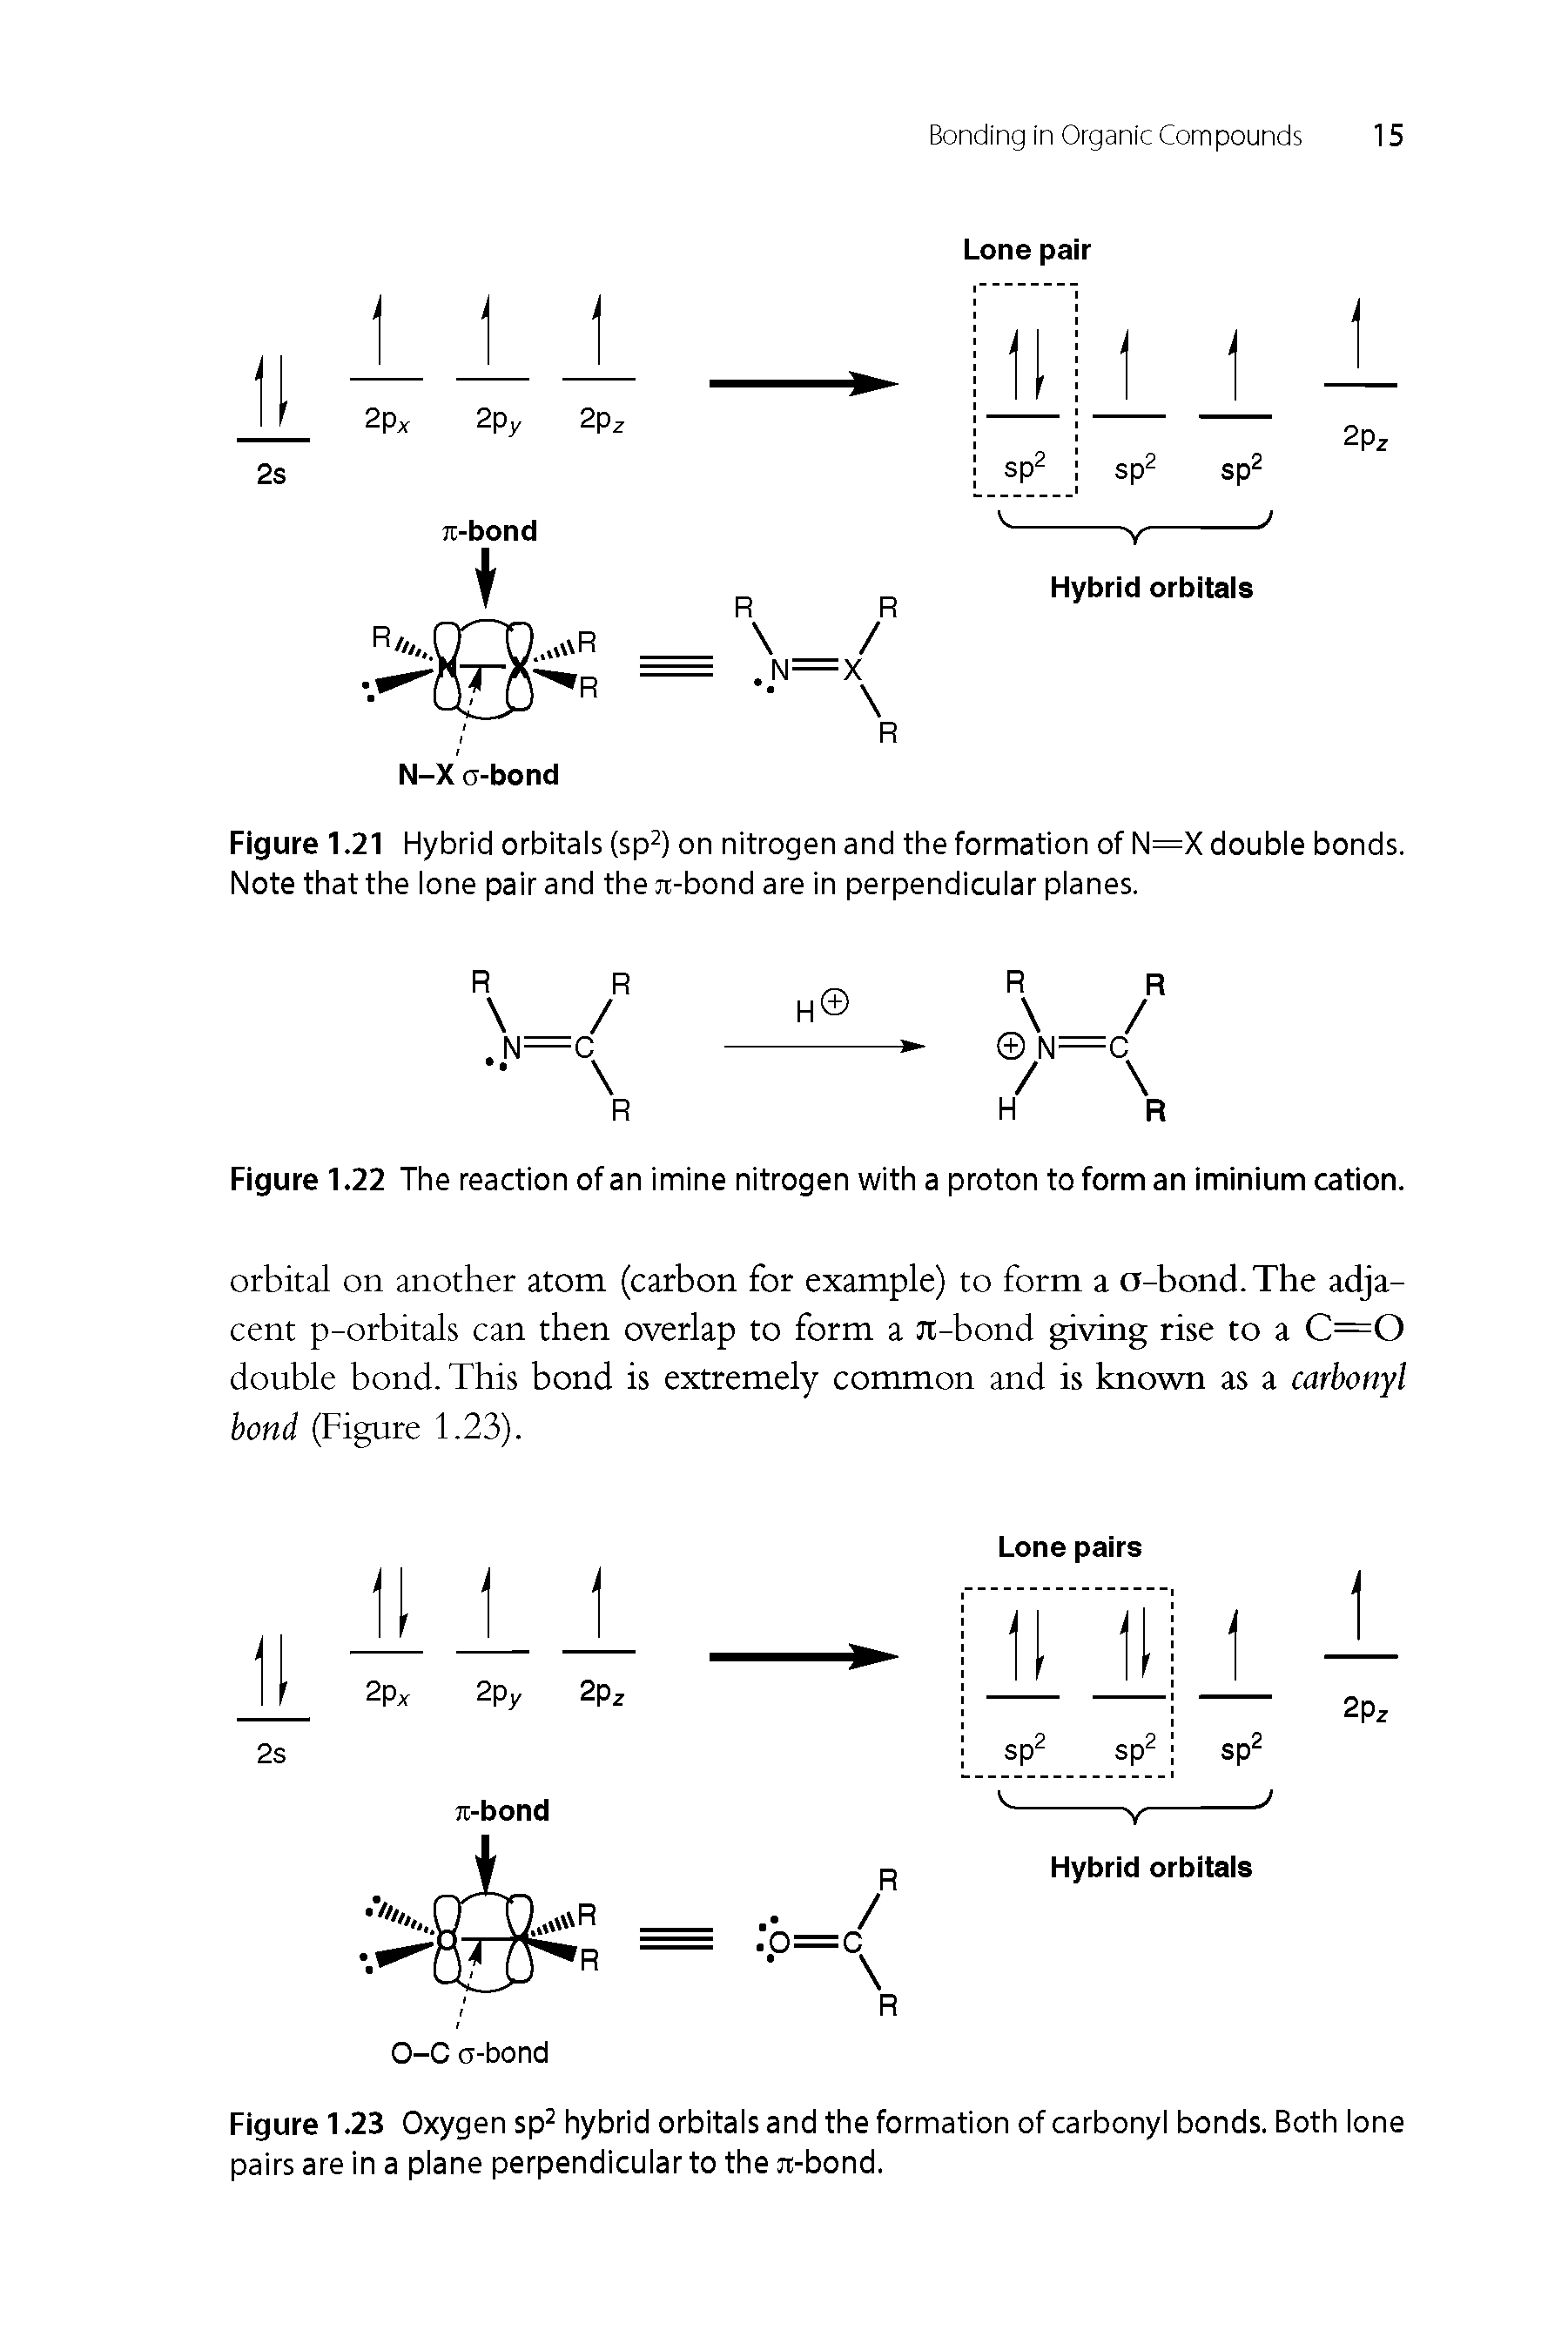 Figure 1.22 The reaction of an imine nitrogen with a proton to form an iminium cation.